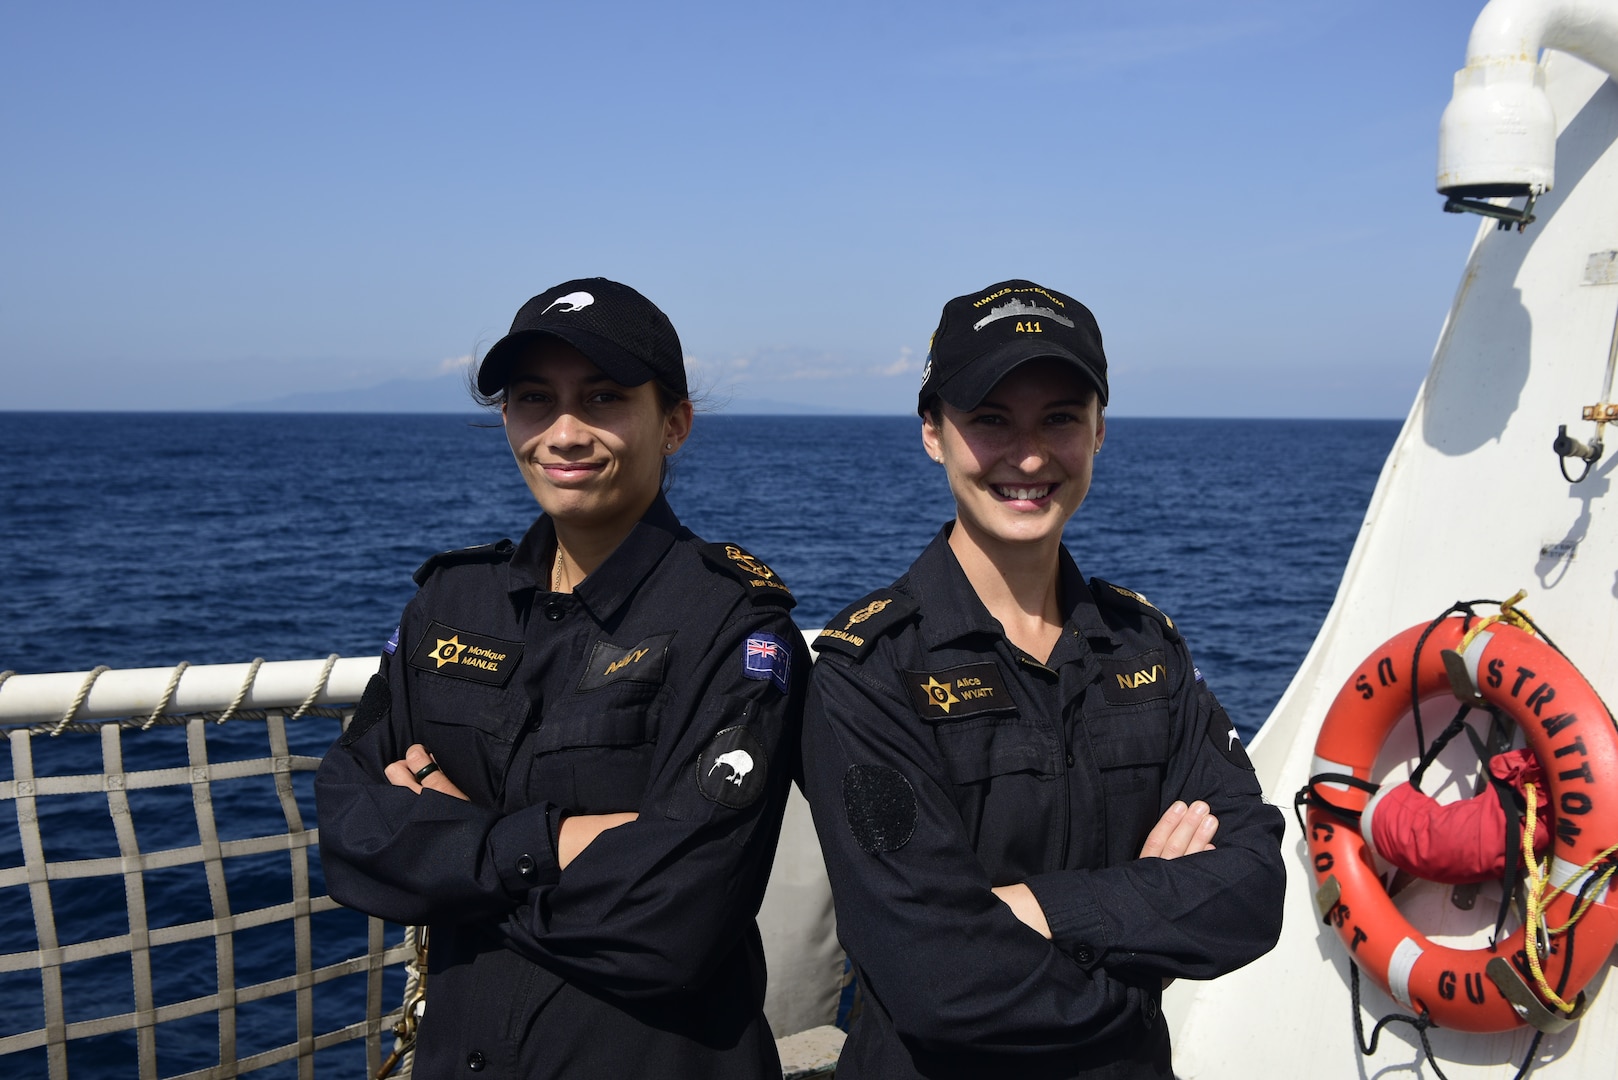 Lead Able Chef Monique Manuel and Able Chef Alice Wyatt, Royal New Zealand Navy Sailors, begin a deployment aboard U.S. Coast Guard Cutter Stratton (WMSL 752) May 26, 2023, in the South China Sea. Stratton deployed to the Western Pacific to conduct engagements with regional allies and partner nations, reinforcing a rules-based order in the maritime domain. (U.S. Coast Guard Petty Officer 2nd Class Michael Clark)